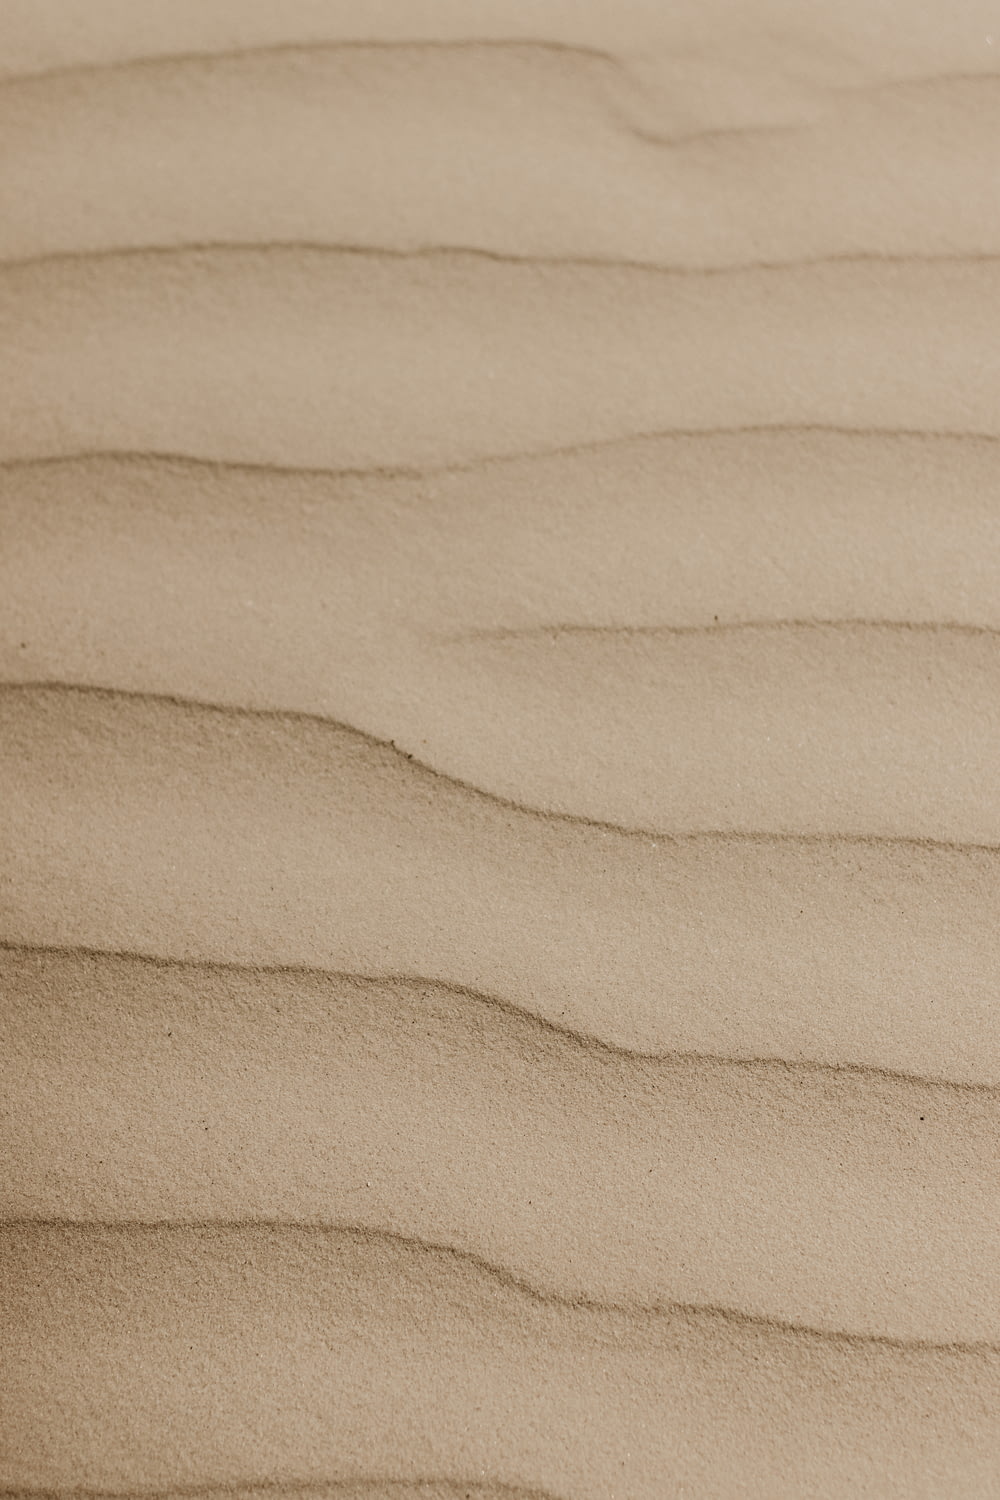 a close up of a sand dune with wavy lines